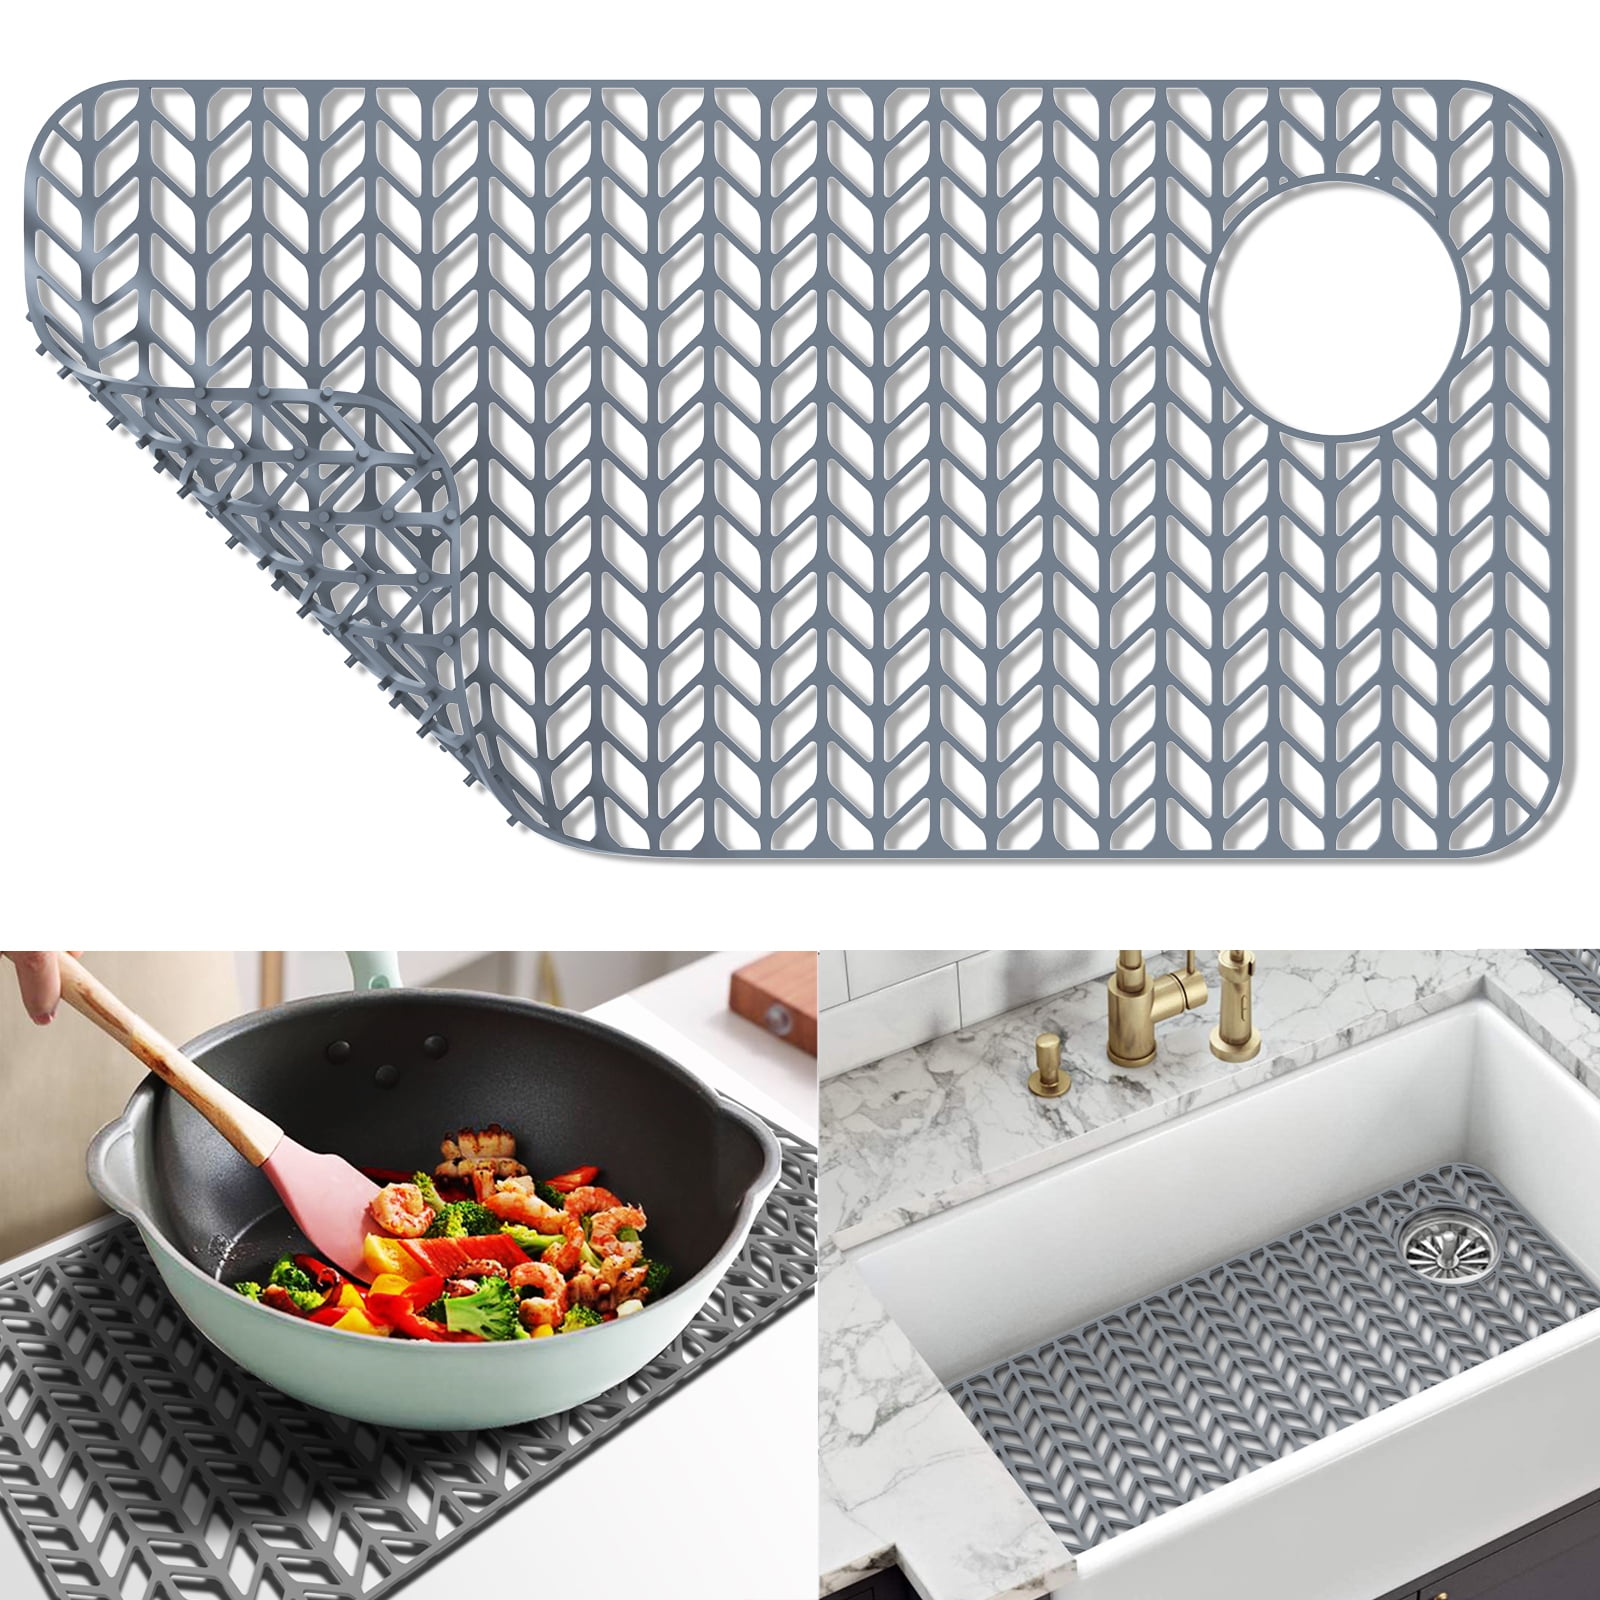 Surpahs 12 x 6 (4Pack) Kitchen Sink Silicone Protector Mat